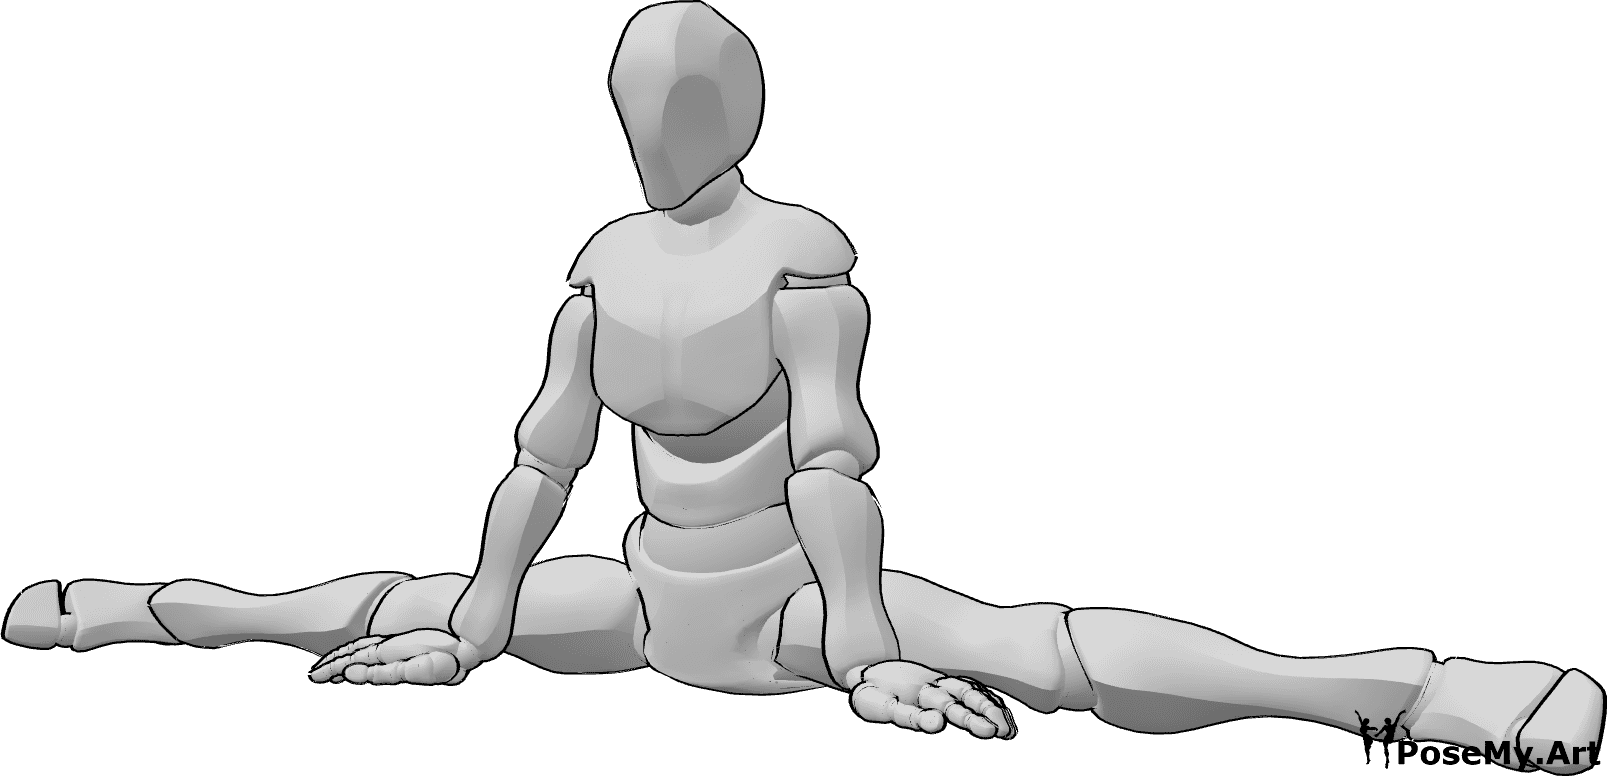 Pose Reference - Male side split pose - Male is doing a side split, leaning on his hands and looking forward